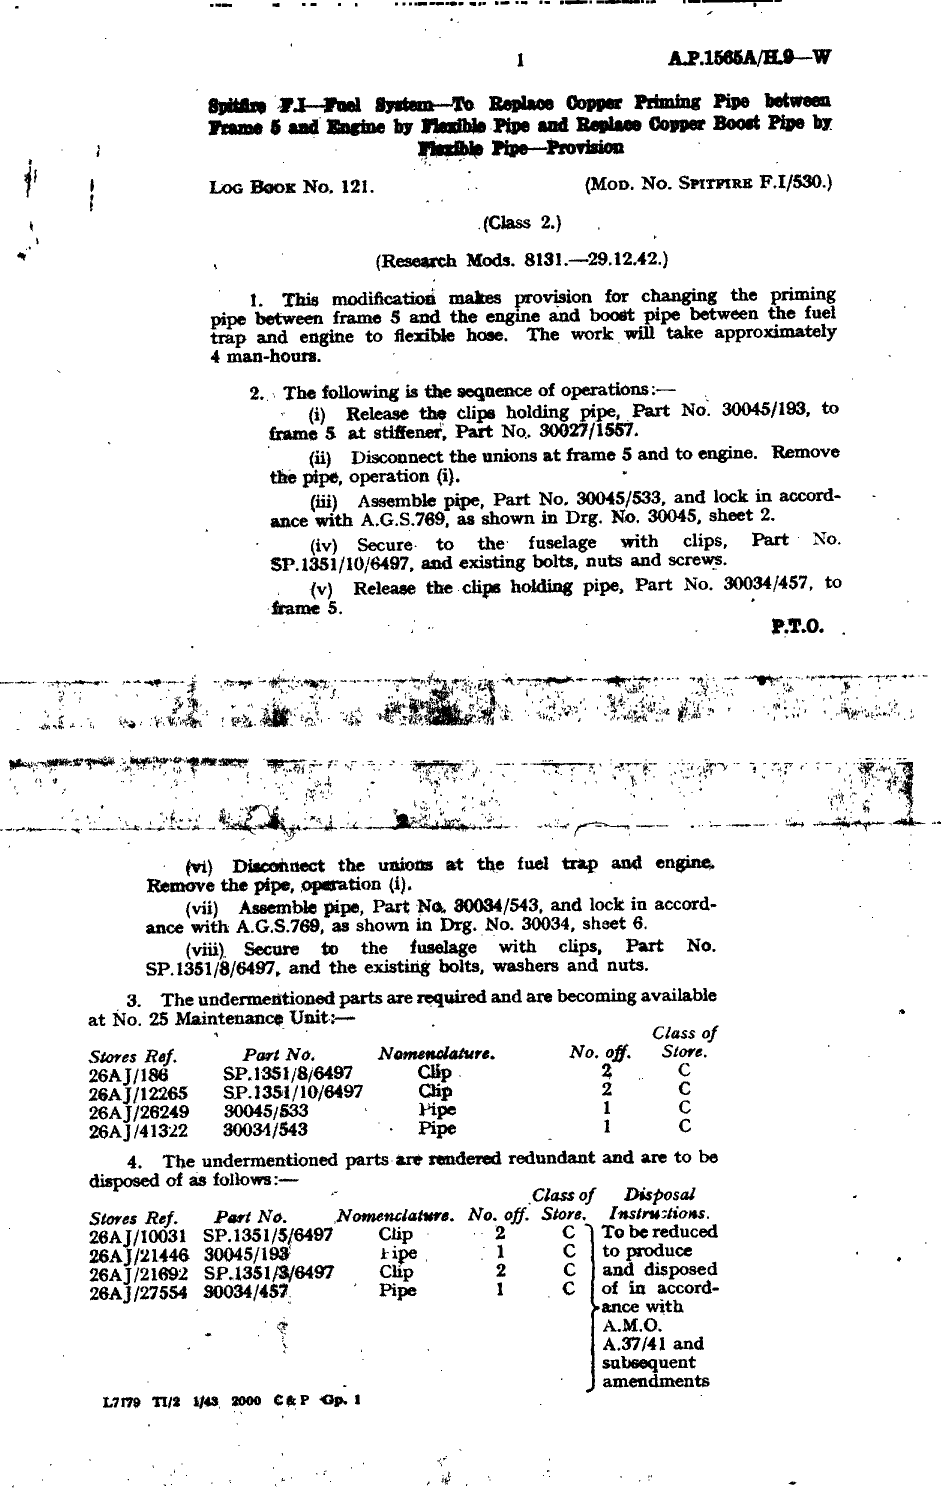 Sample page 1 from AirCorps Library document: Spitfire F.I Fuel System To Replace Copper Priming Pipe Between Frame 5 and Engine by Flexible Pipe and Replace Copper Boost Pipe By Flexible Pipe Provision